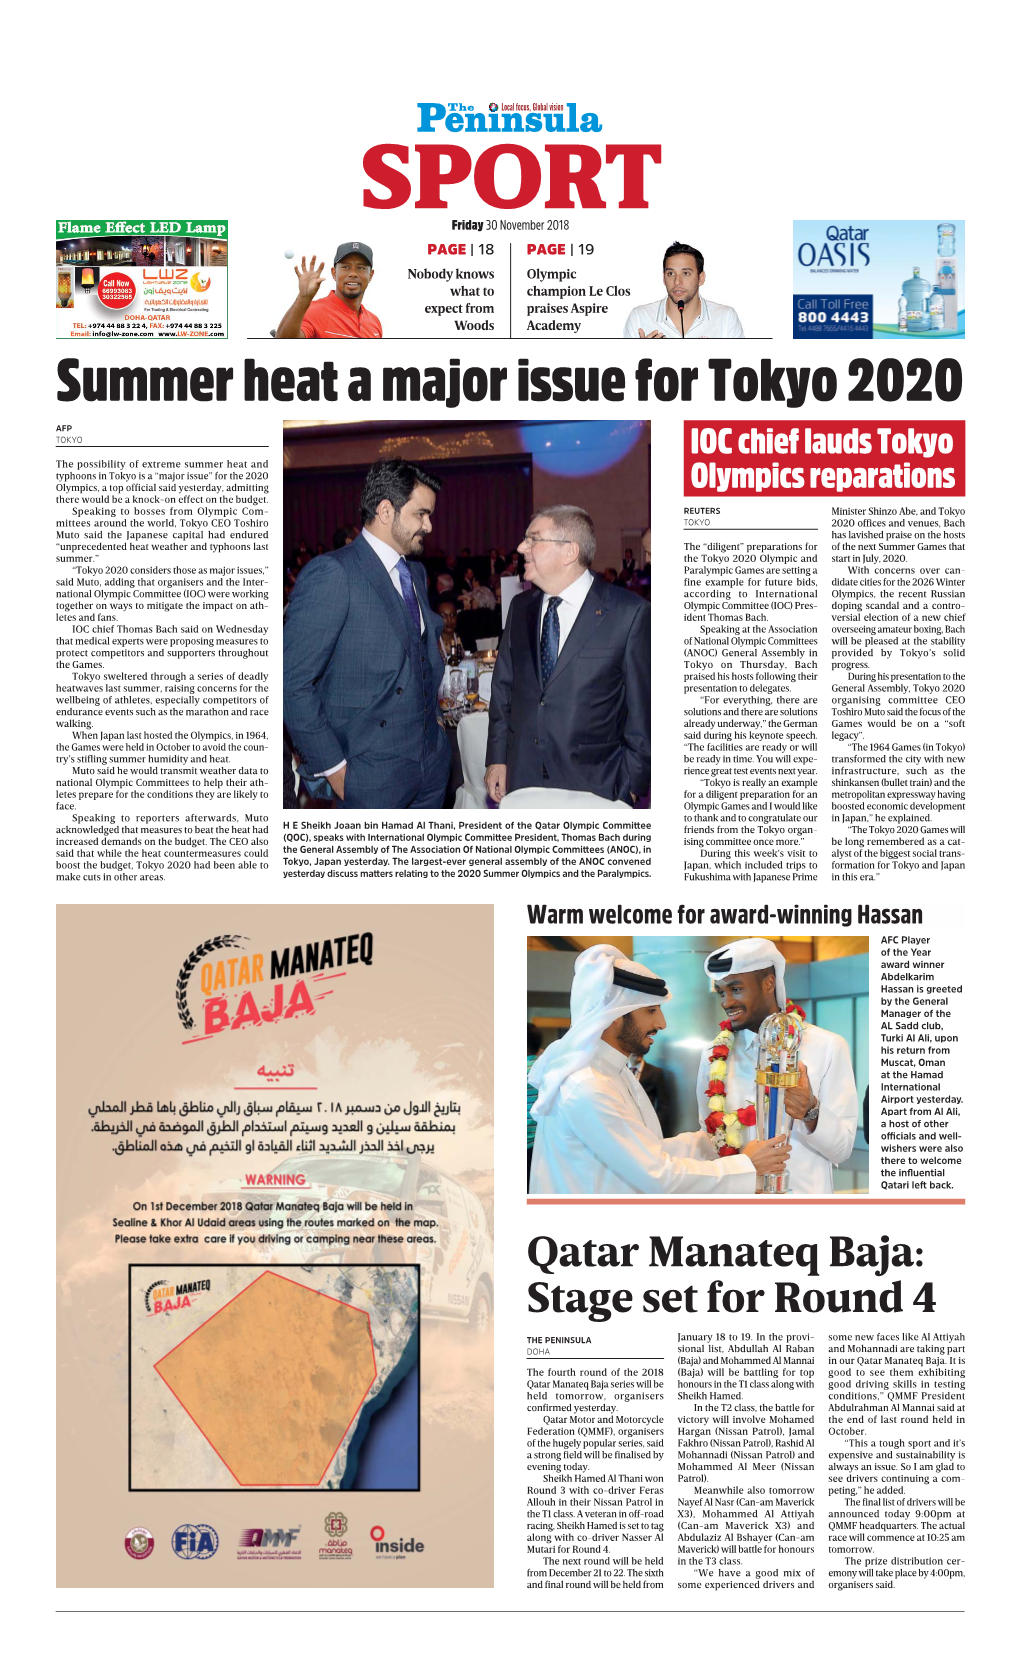 Summer Heat a Major Issue for Tokyo 2020